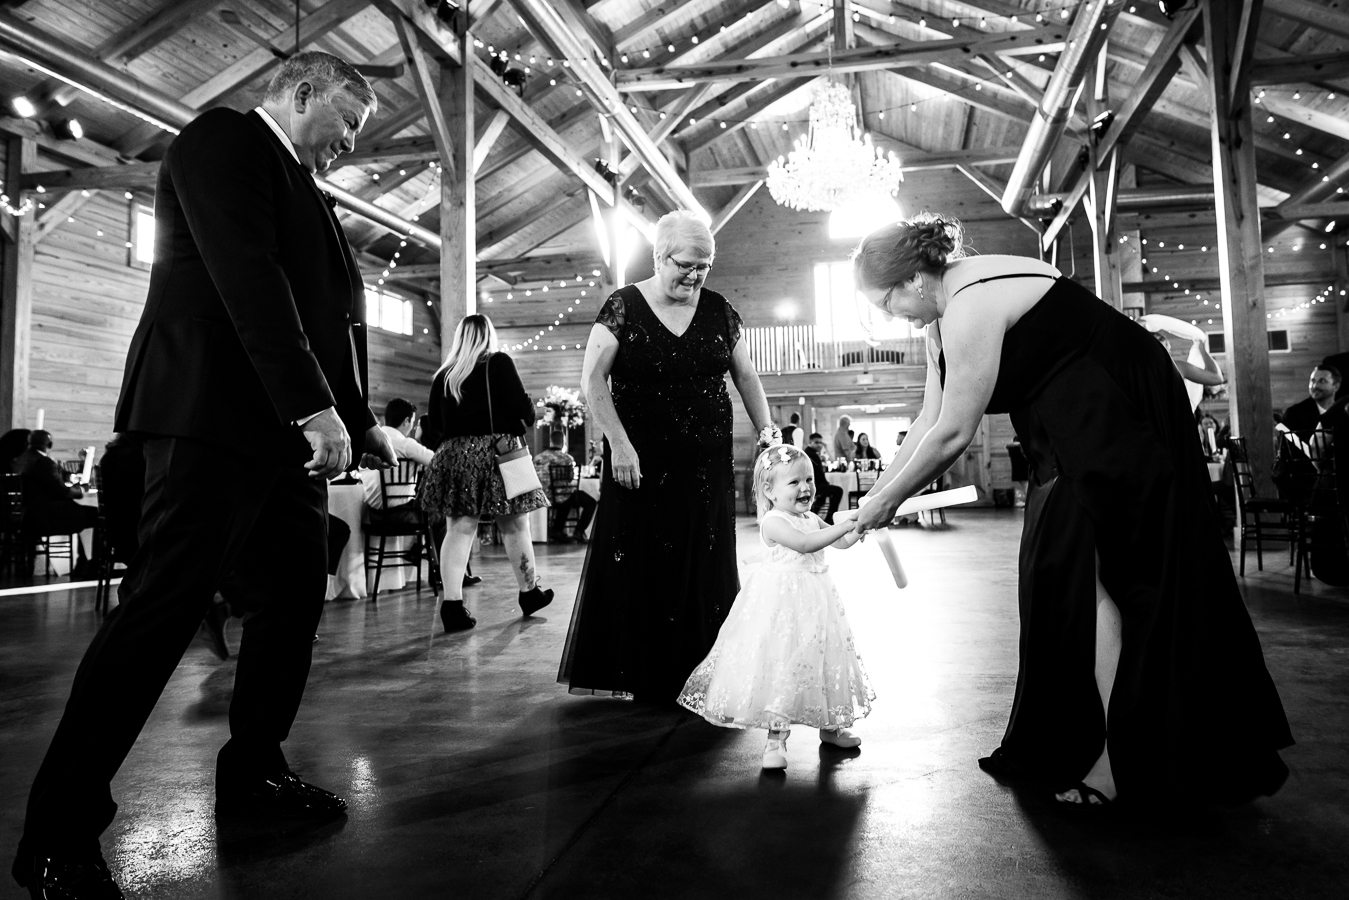 authentic Wedding Photographer, lisa rhinehart, captures this black and white image of guests dancing together with the flowergirl during the wedding reception 